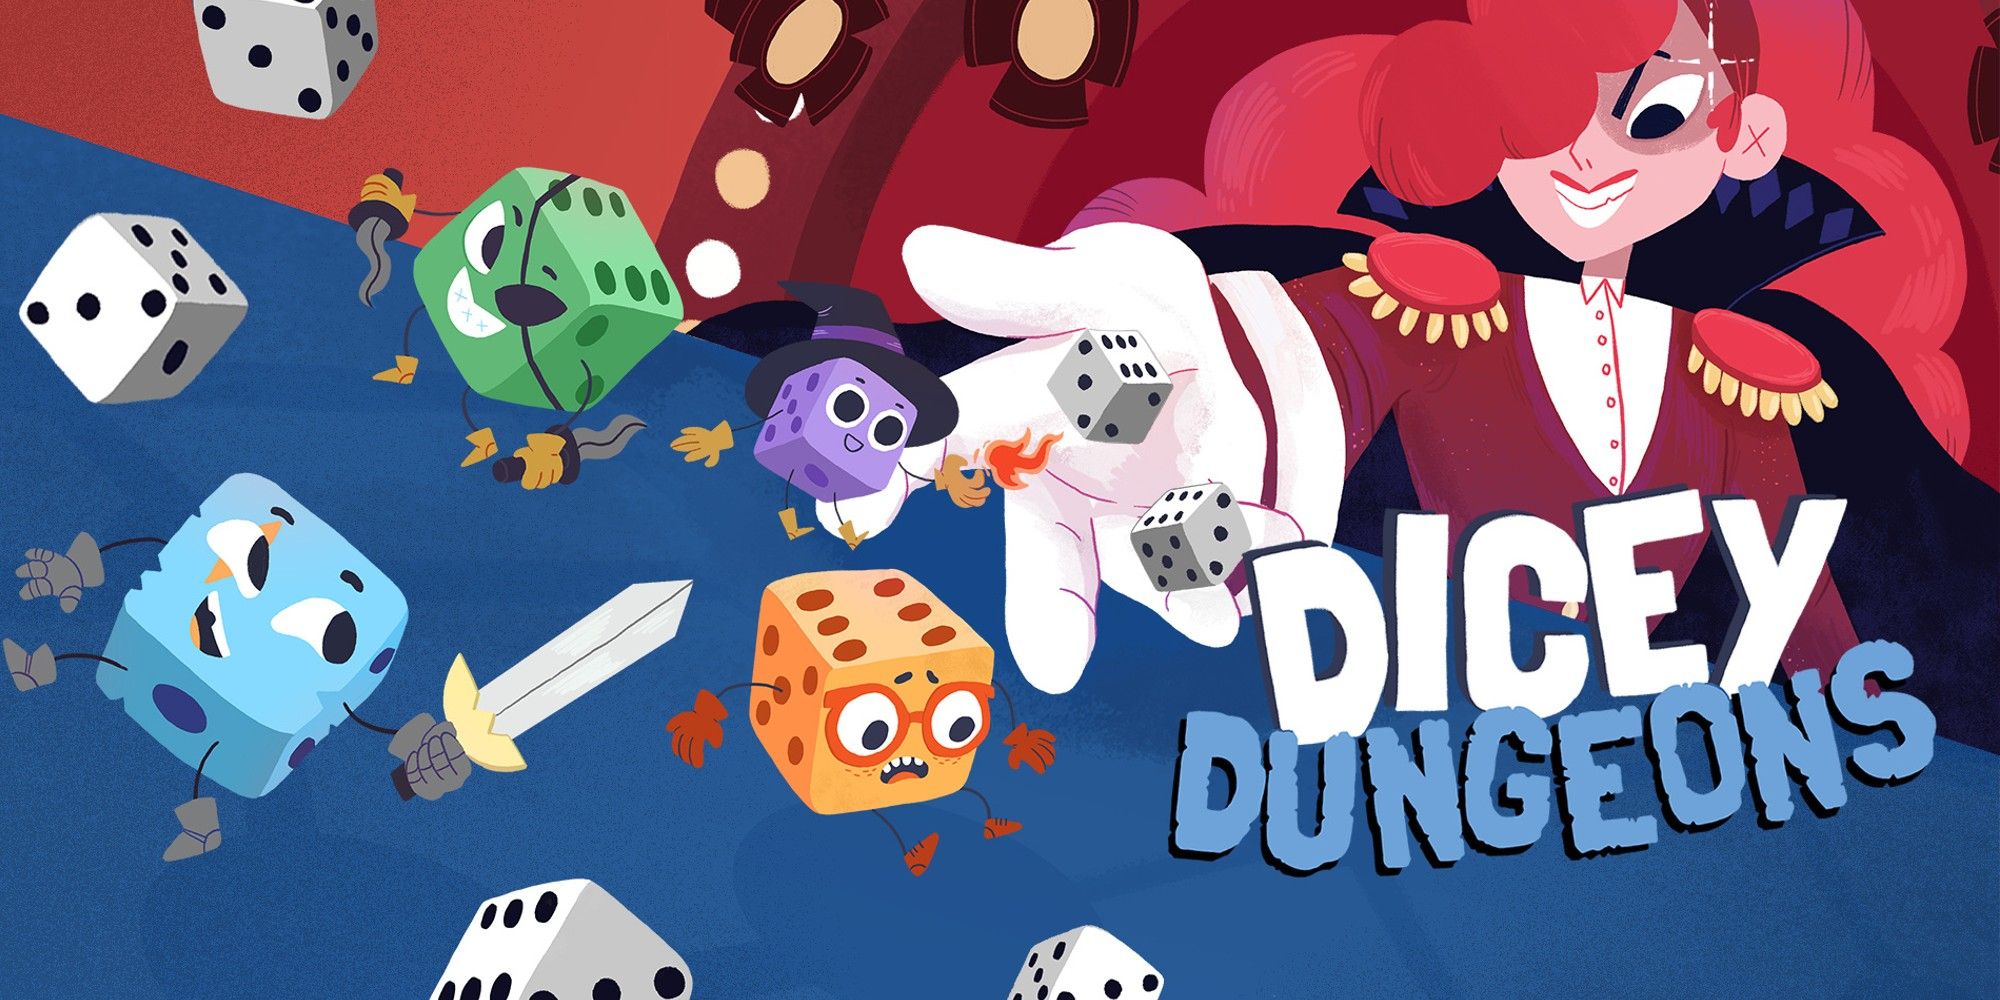 promotional art for the game Dicey Dungeons featuring a series of dice-characters being flung from the hand of Lady Luck with the game's logo in the bottom right corner